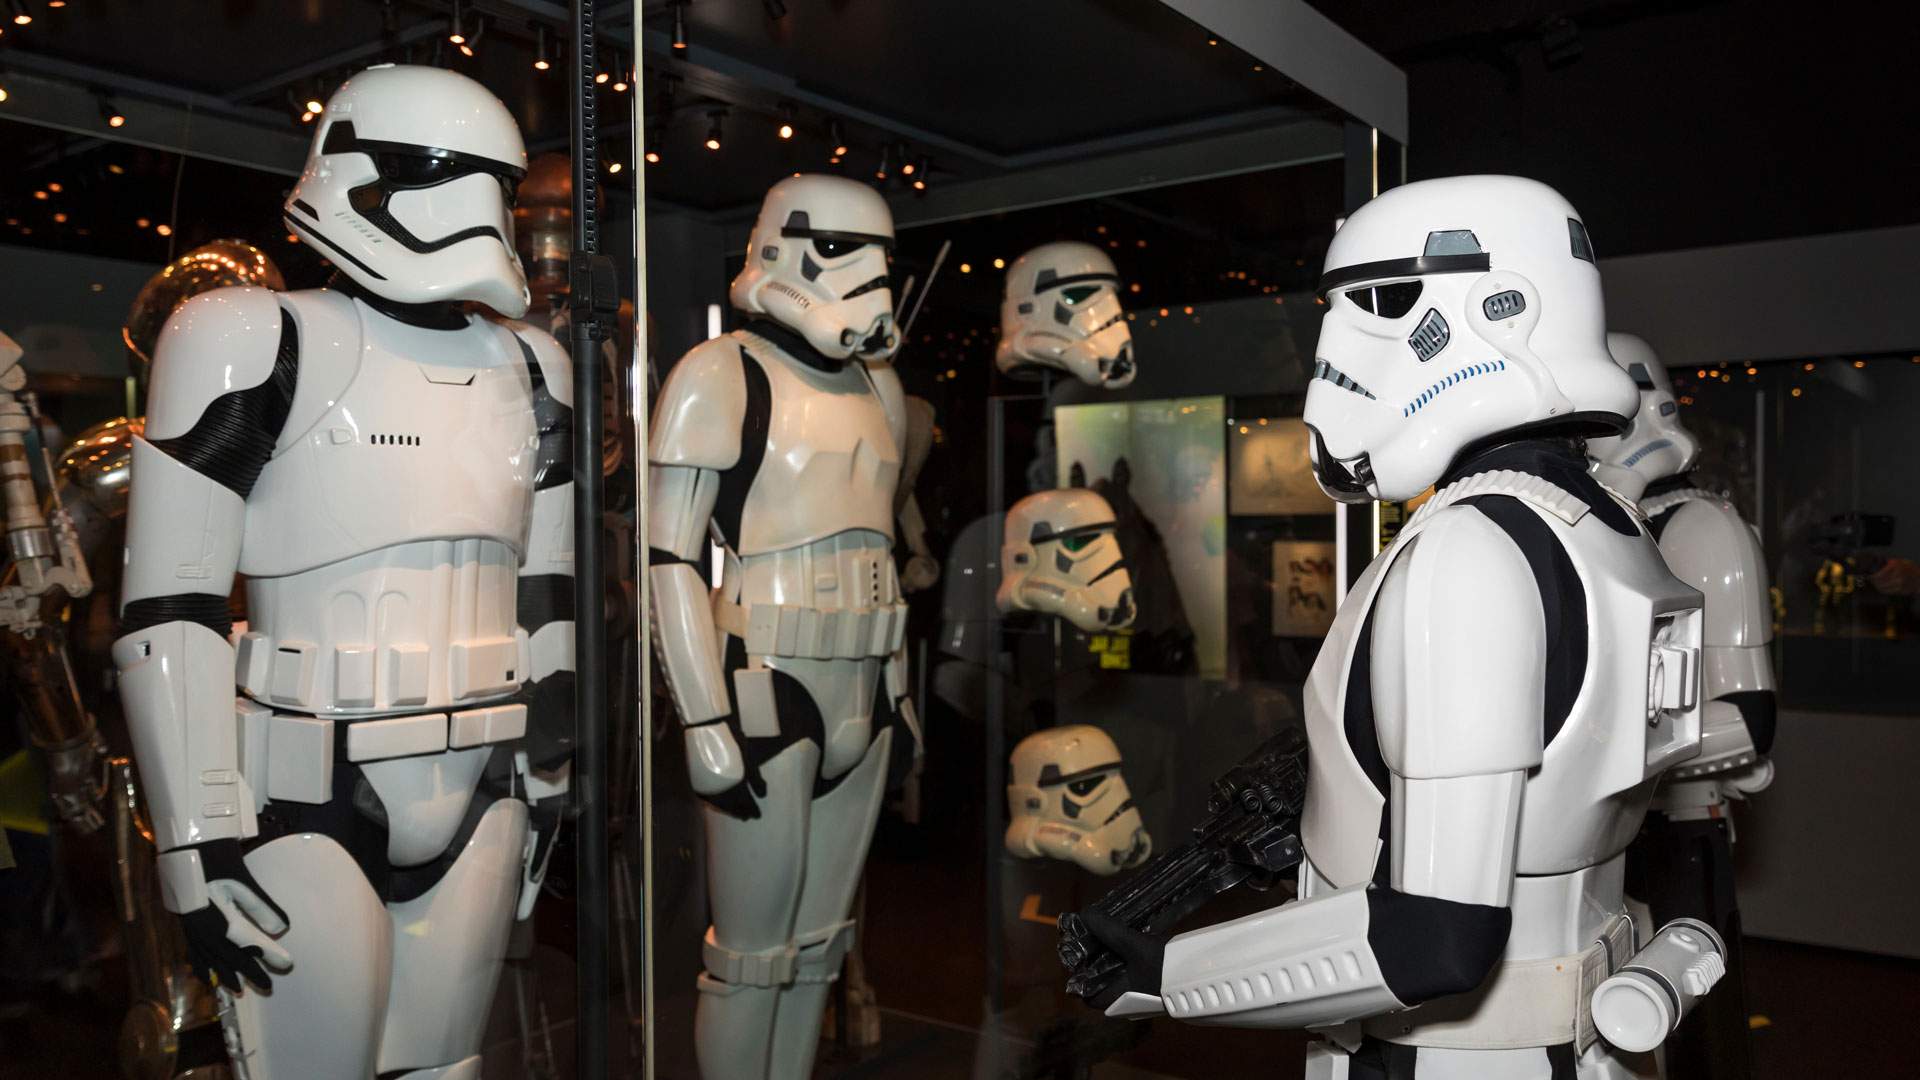 'Star Wars' Identities: The Exhibition